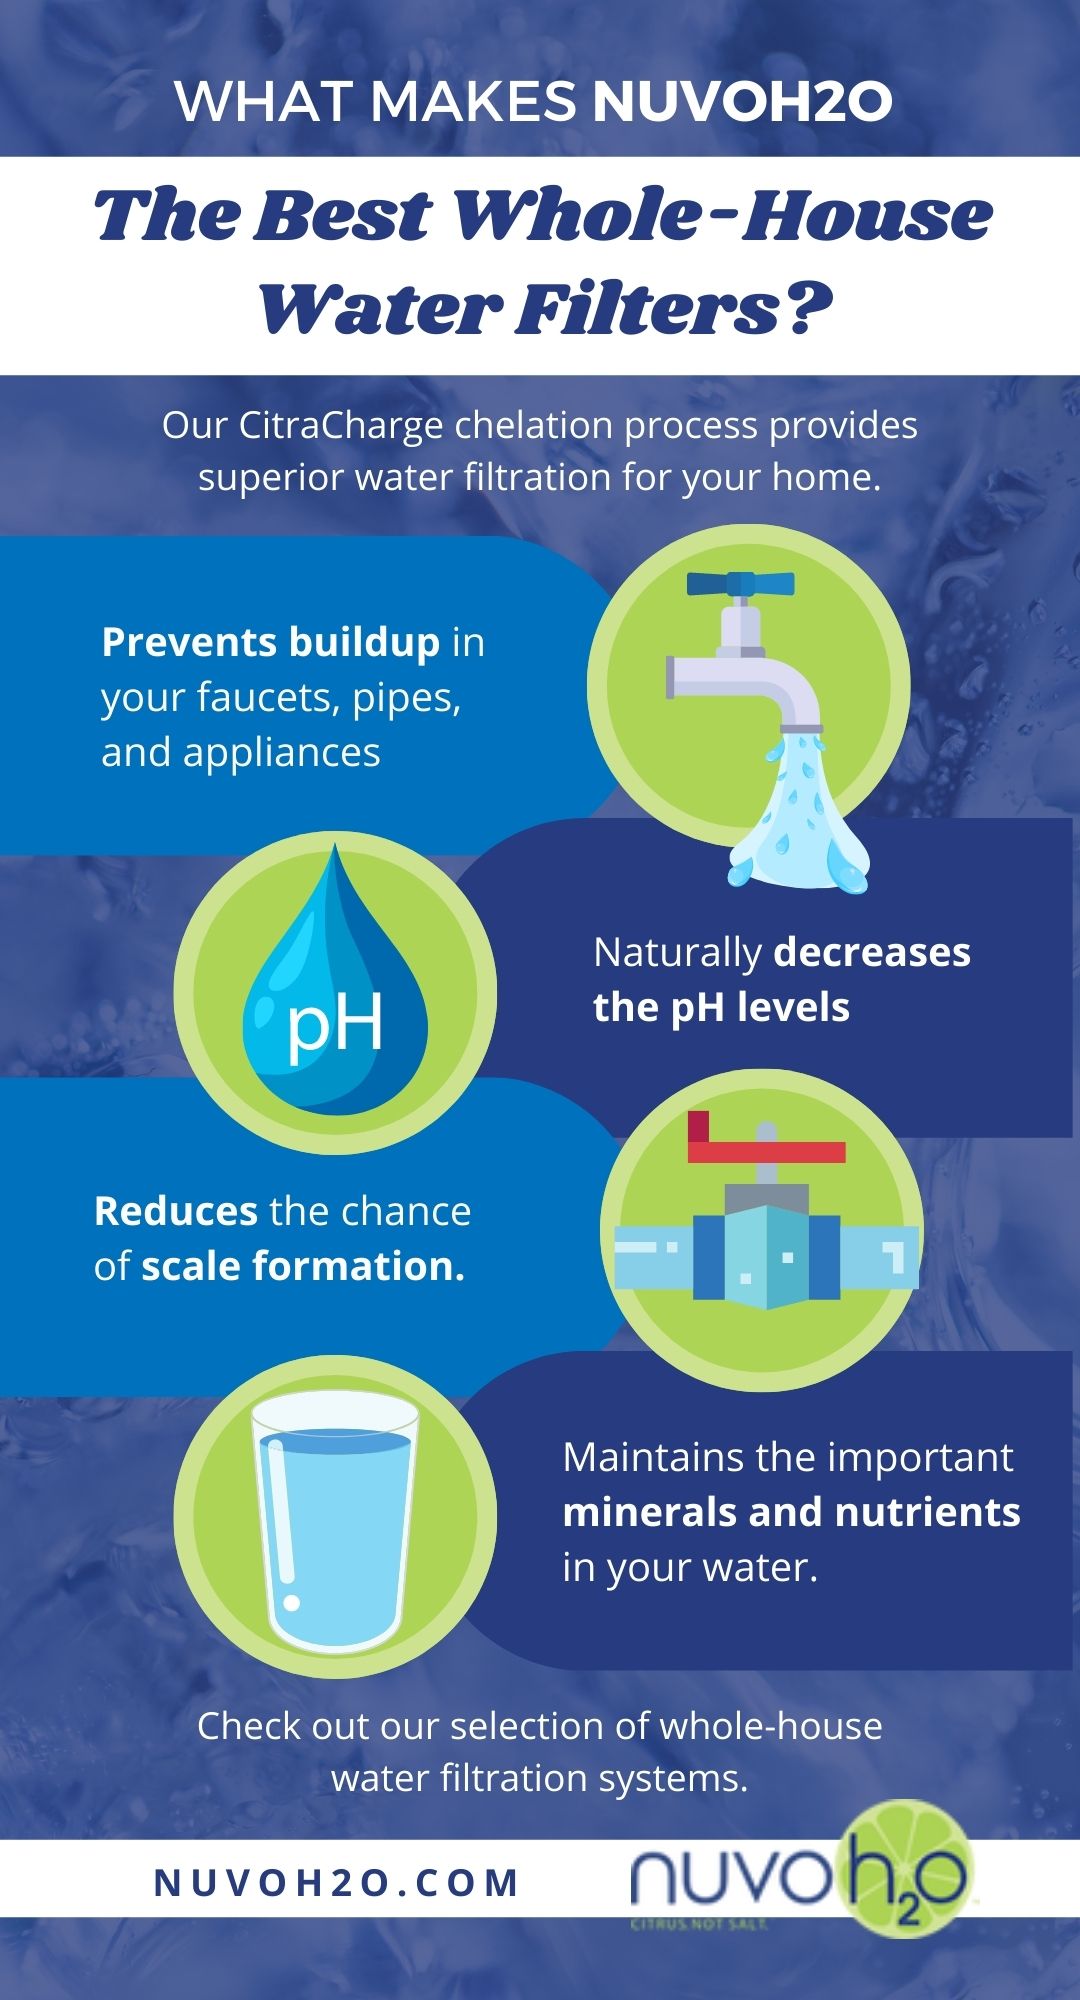 Infographic - What makes NuvoH2O The Best Whole-House Water Filters?